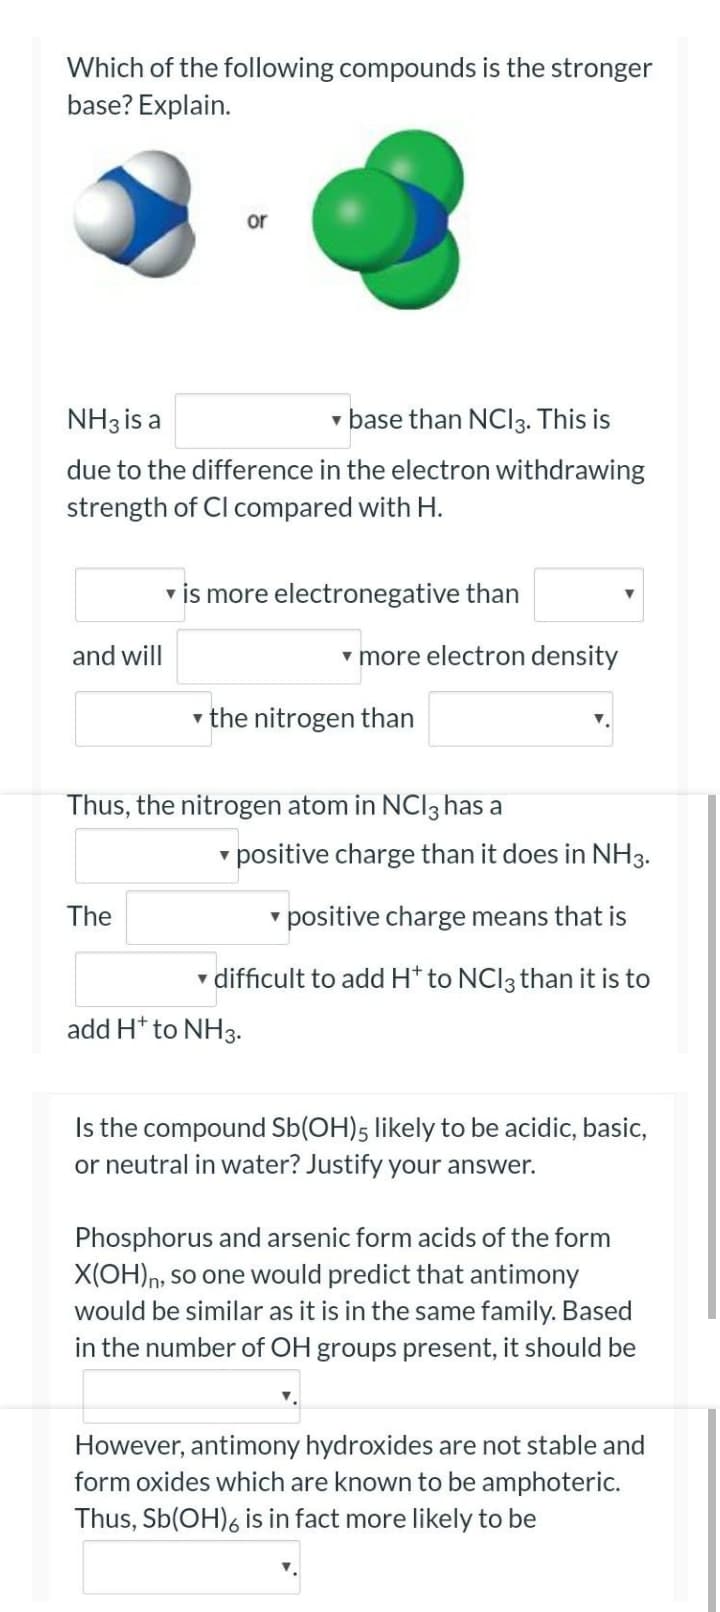 Which of the following compounds is the stronger
base? Explain.
or
NH3 is a
v base than NCI3. This is
due to the difference in the electron withdrawing
strength of Cl compared with H.
v is more electronegative than
and will
v more electron density
v the nitrogen than
Thus, the nitrogen atom in NCI3 has a
v positive charge than it does in NH3.
The
v positive charge means that is
v difficult to add H* to NCI3 than it is to
add H* to NH3.
Is the compound Sb(OH)5 likely to be acidic, basic,
or neutral in water? Justify your answer.
Phosphorus and arsenic form acids of the form
X(OH)n, so one would predict that antimony
would be similar as it is in the same family. Based
in the number of OH groups present, it should be
However, antimony hydroxides are not stable and
form oxides which are known to be amphoteric.
Thus, Sb(OH)6 is in fact more likely to be
